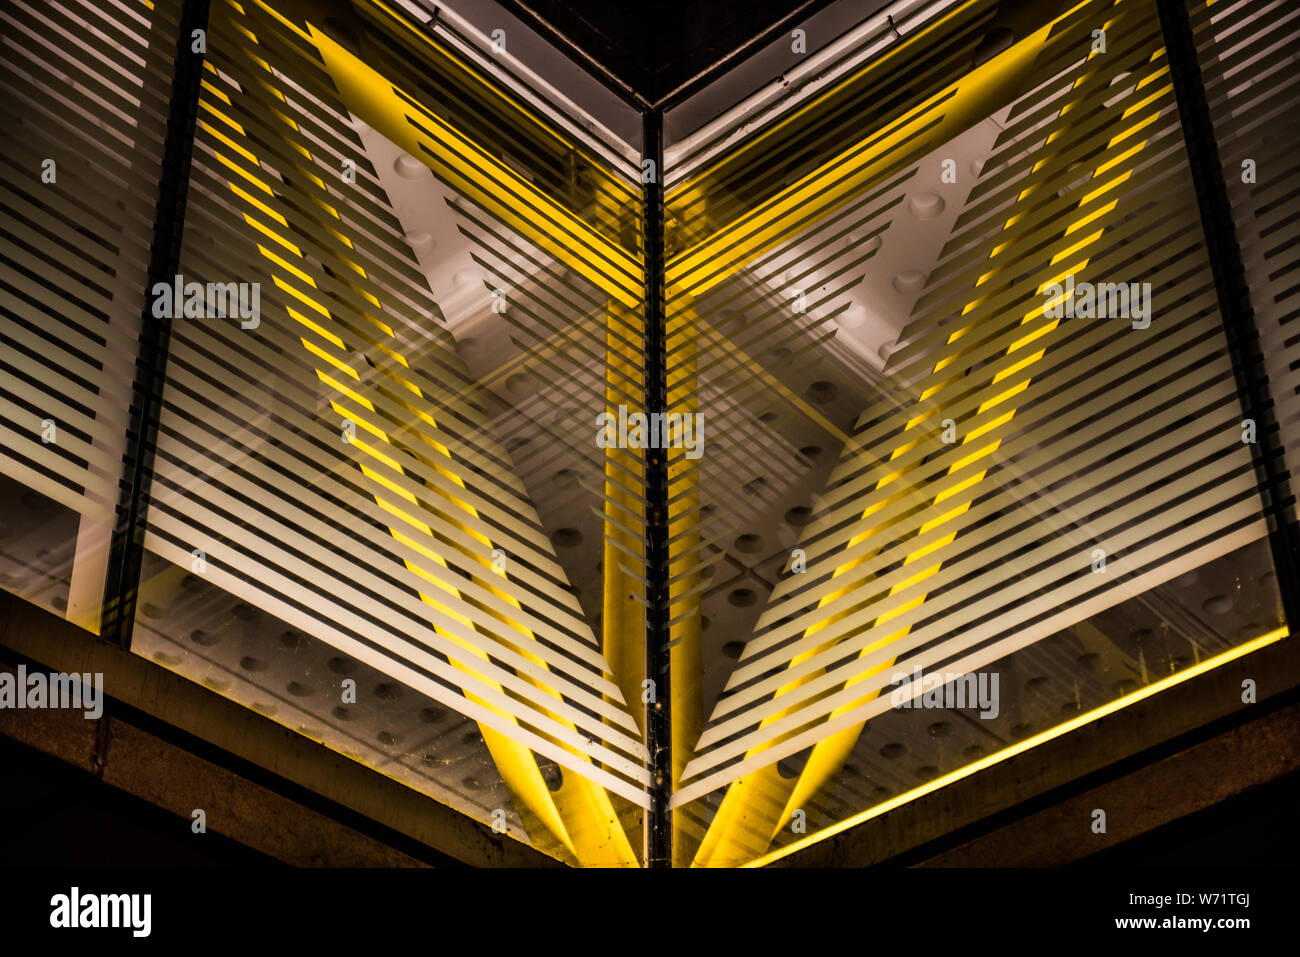 Chicago pedway section from 300 E Randolph street Stock Photo